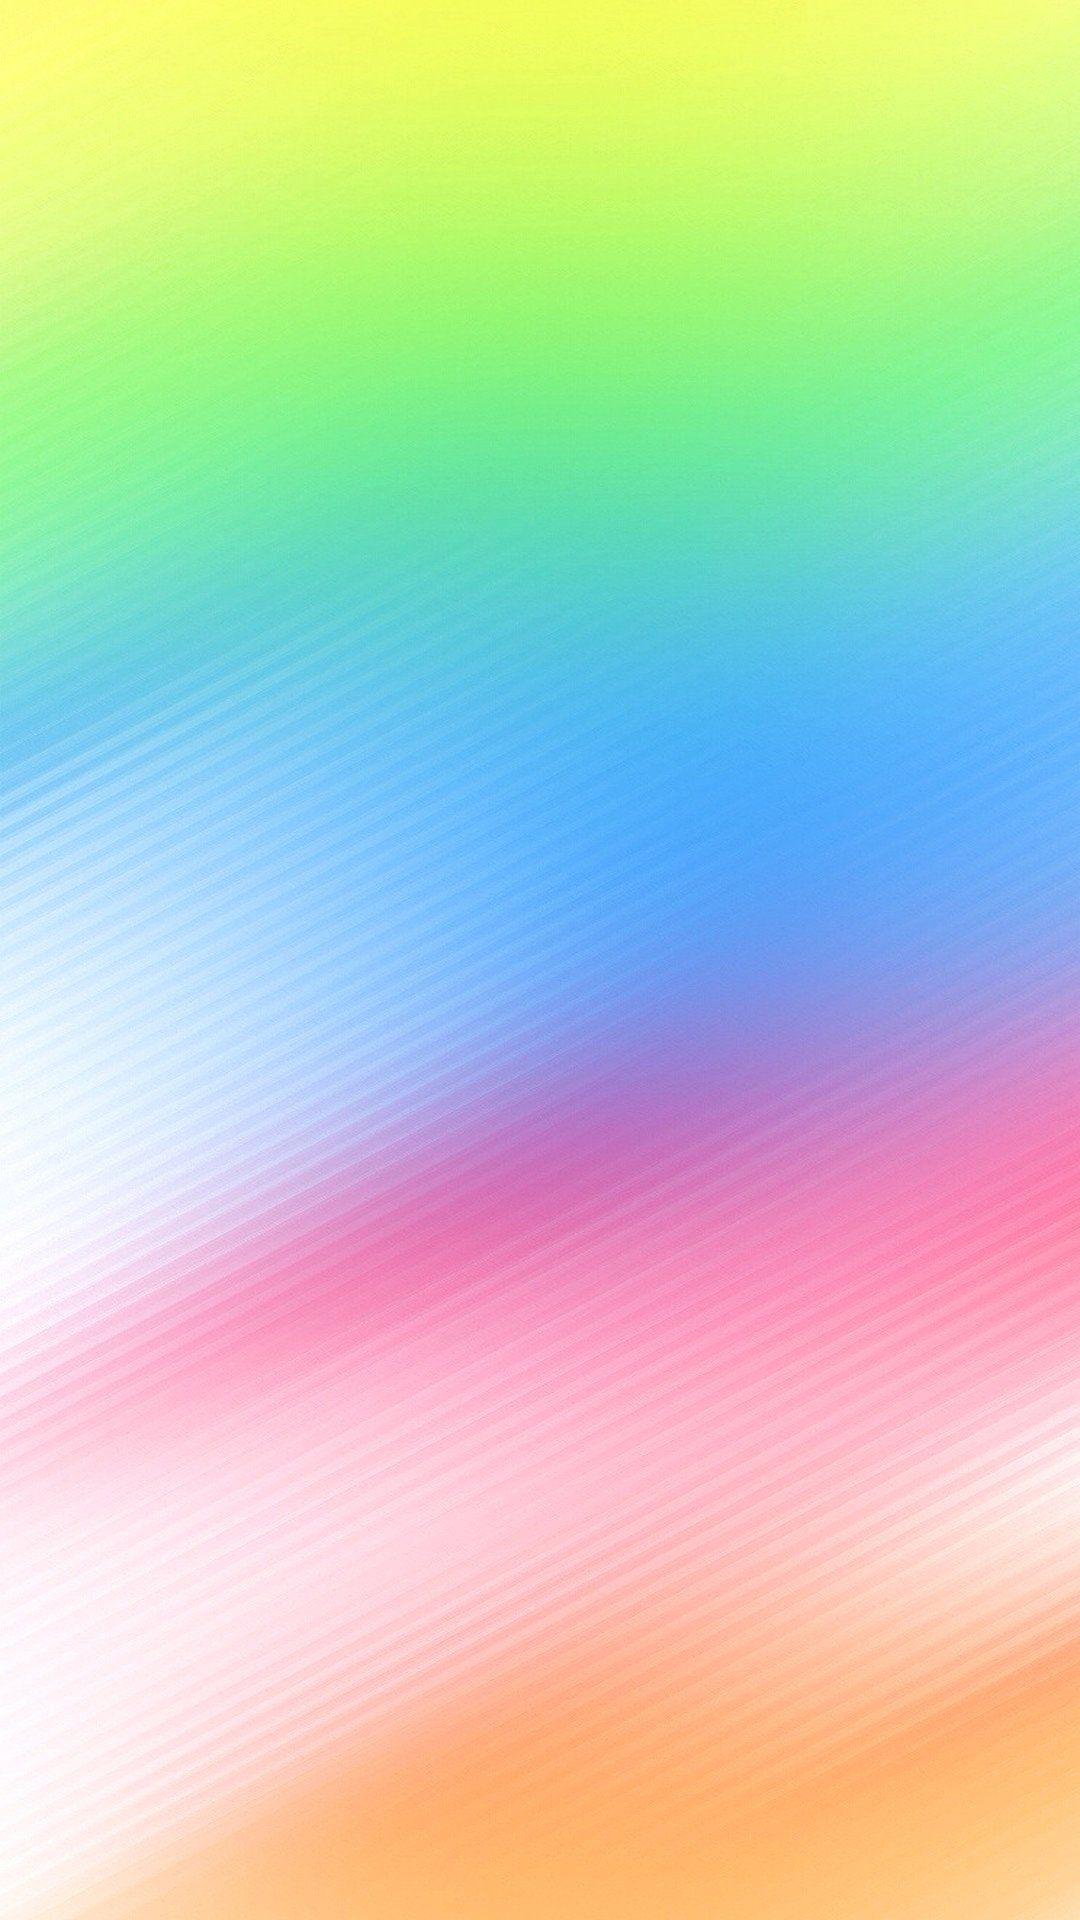 Free download 66 Ipod Touch Wallpaper [1080x1920] for your Desktop, Mobile & Tablet. Explore iPod Wallpaper Downloads. Wallpaper for iPod Touch, iPod 5 Wallpaper, Free iPod Touch Wallpaper